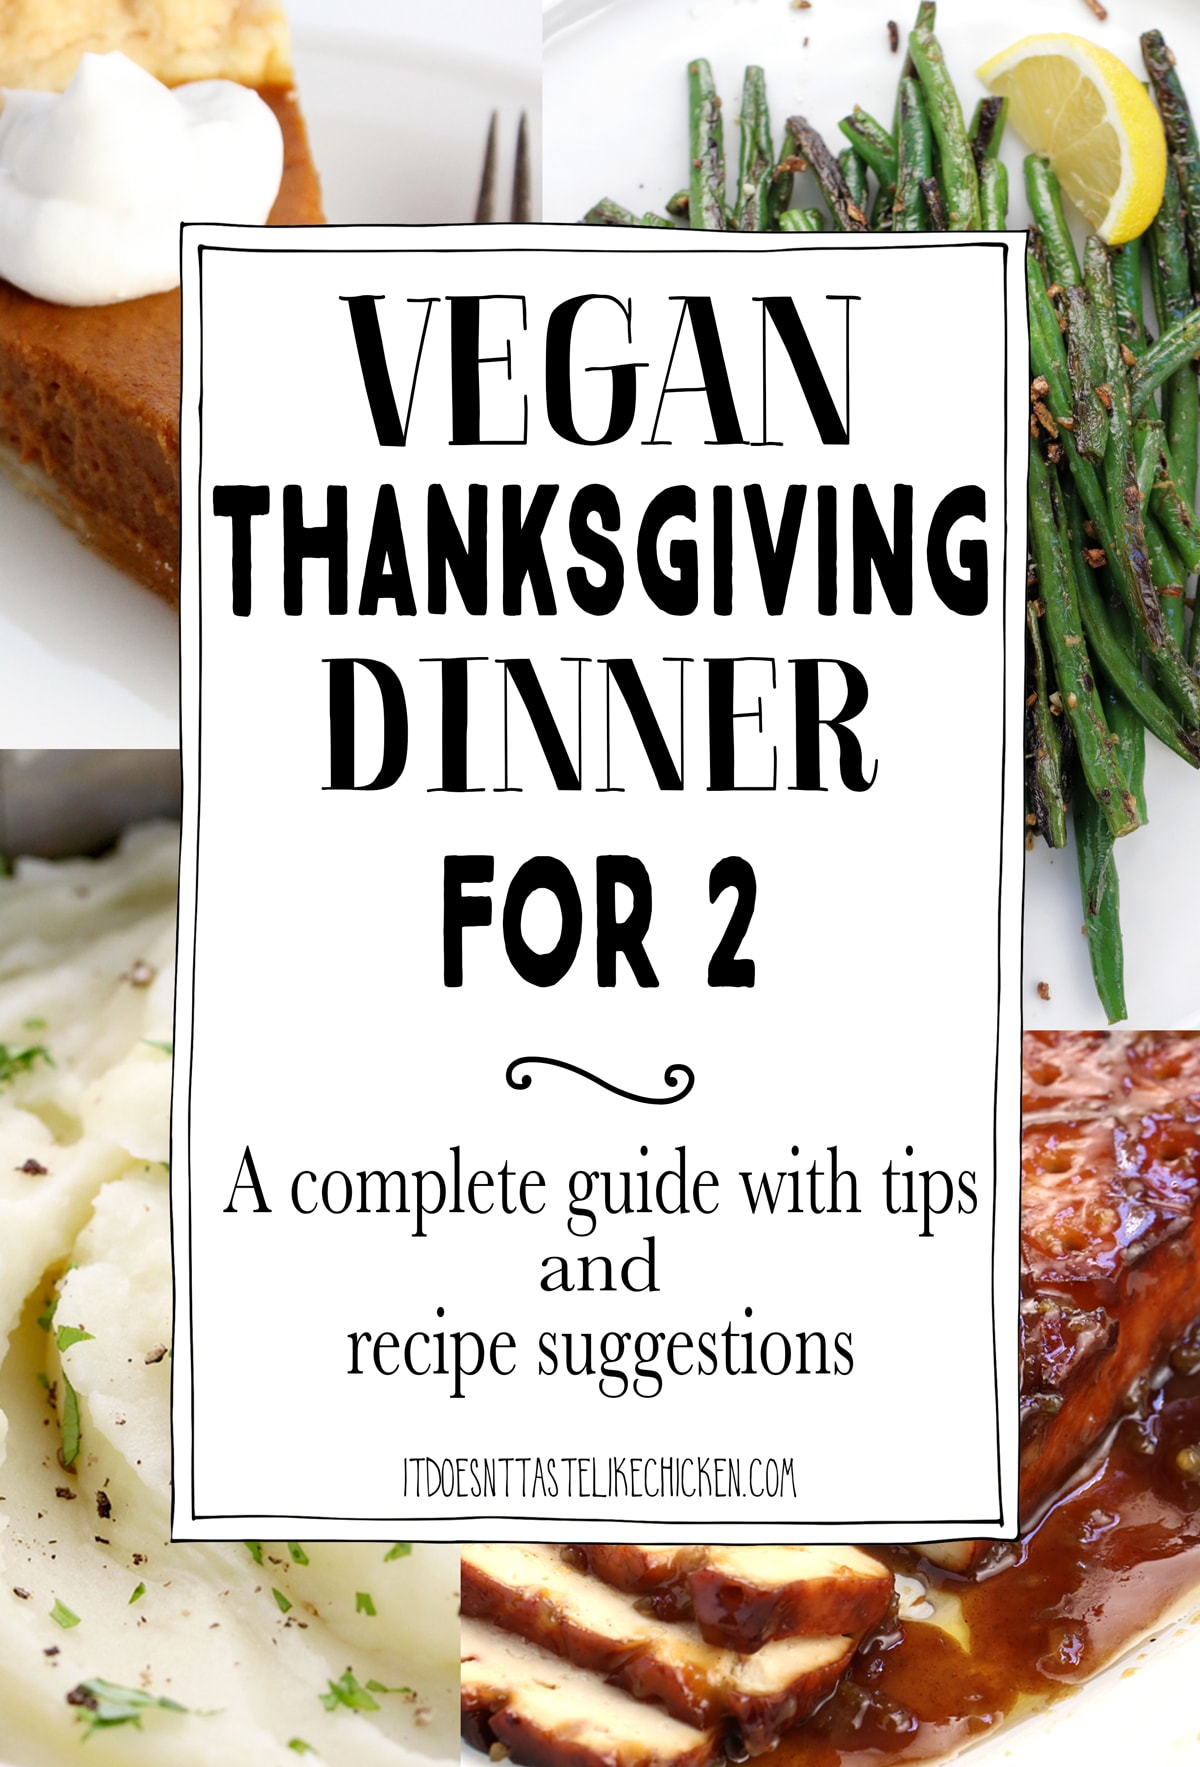 Vegan Thanksgiving Dinner for 2 - a complete guide with recipe suggestions. Whether it be social distancing that's keeping your celebrations small, or you just prefer it that way, this guide will help you design the perfect menu to celebrate this special occasion. Lots of tips are included to make your celebration easy and special. #itdoesnttastelikechicken #veganthanksgiving #thanksgiving